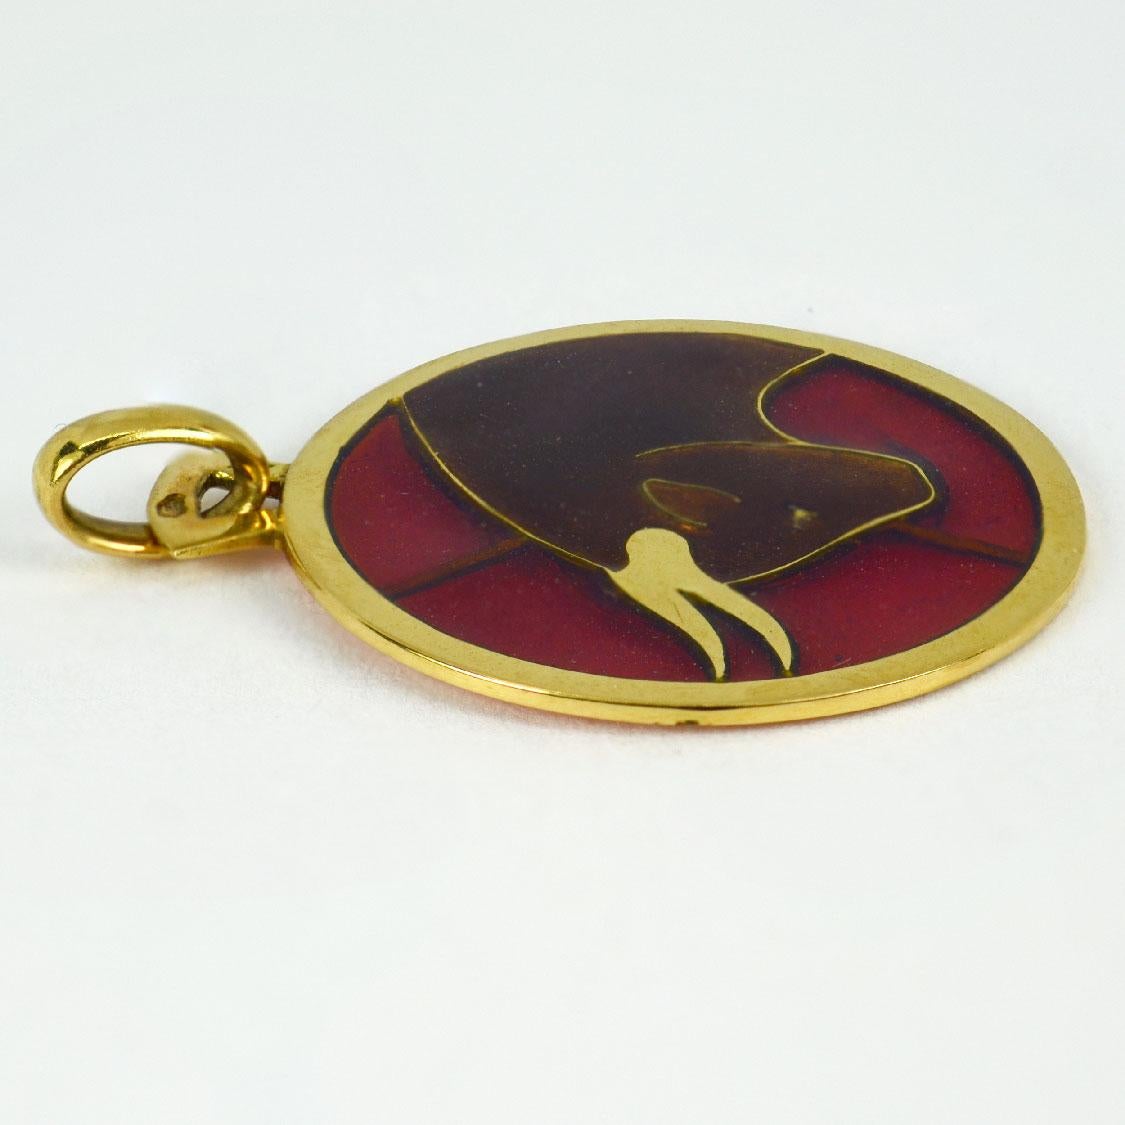 A French 18 karat (18K) yellow gold charm pendant designed as the Zodiac sign of Taurus depicting the head of a bull with plique a jour enamel. Stamped with the French eagle’s head for 18 karat gold and makers mark for Arthus Bertrand.

Dimensions: